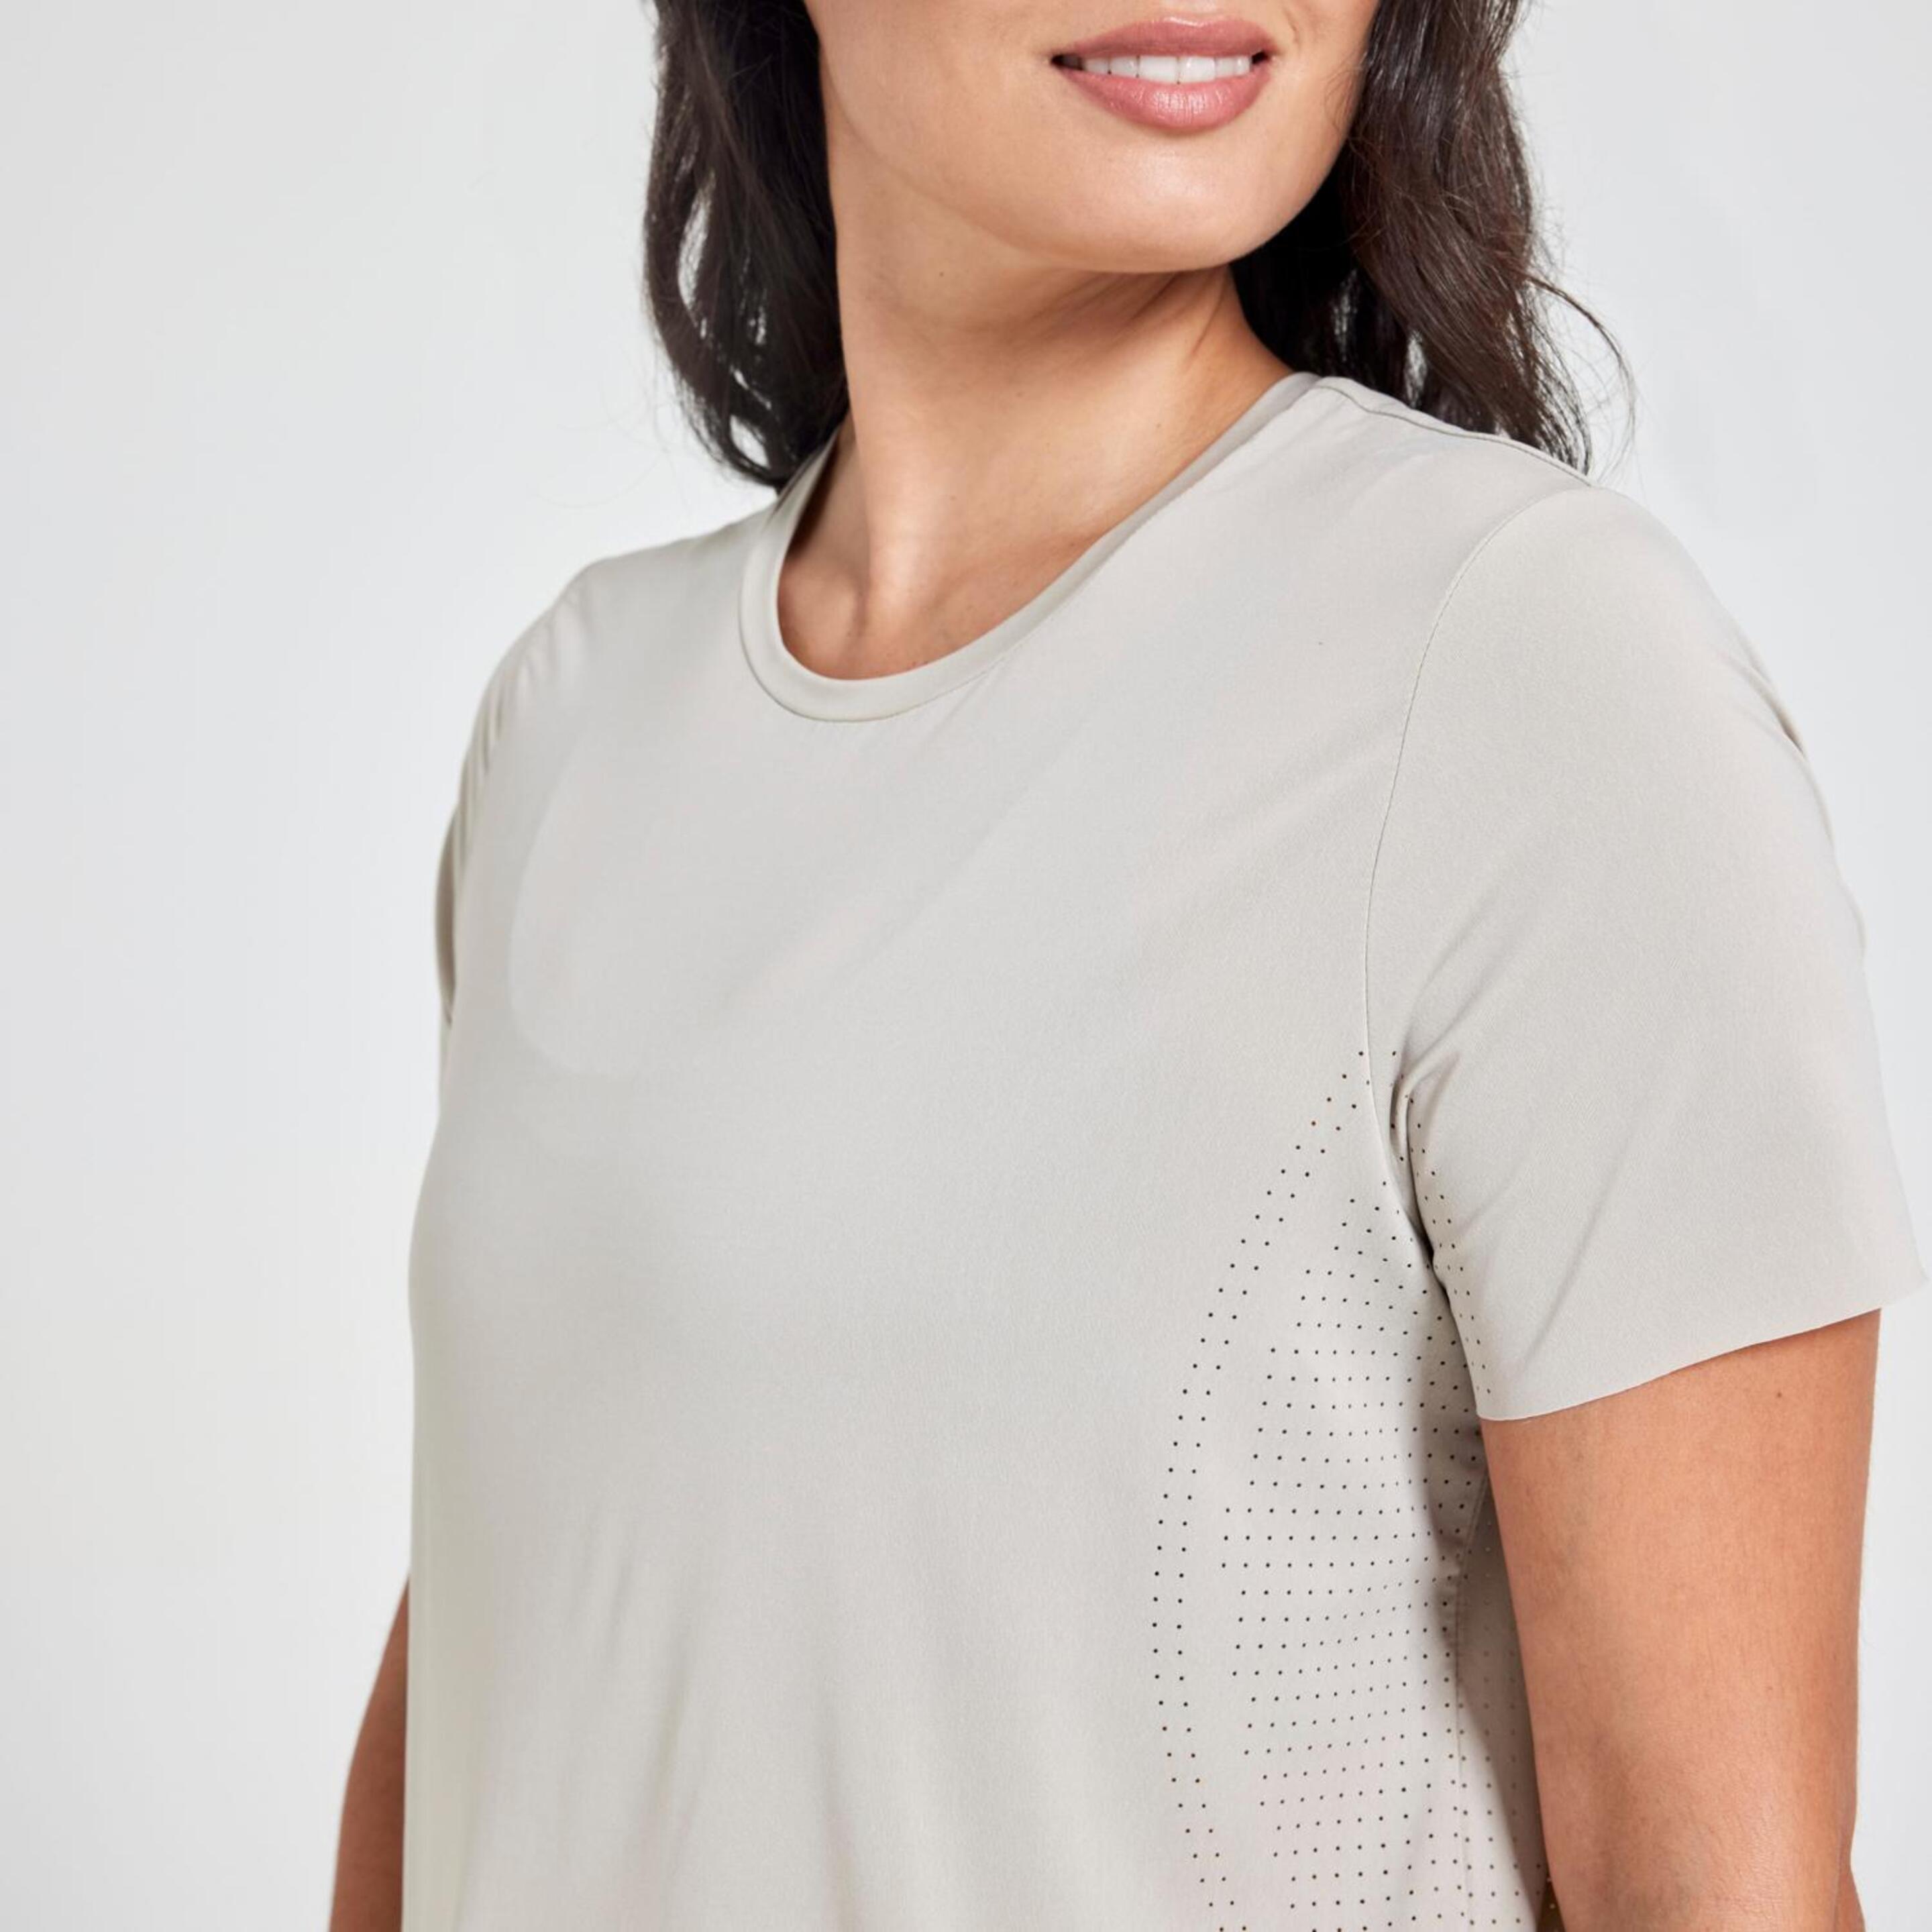 Doone Casual Luxe - Bege - T-shirt Mulher | Sport Zone